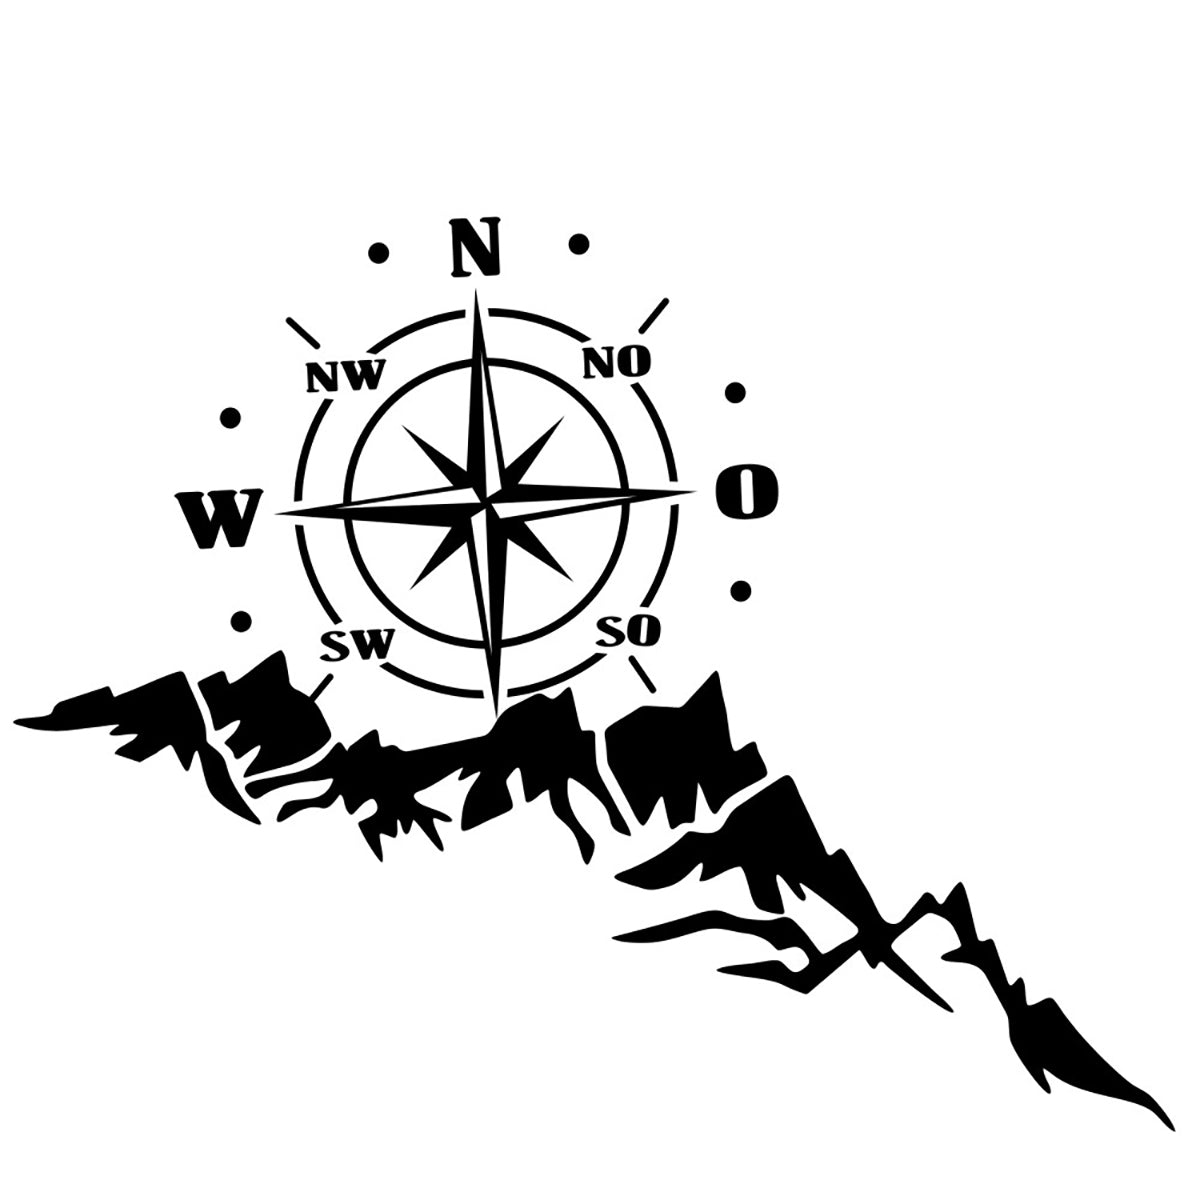 Black 65x35cm Sticker Body Hood Vinyl Decal Compass W/ Mountains For Camper Motorhome Boat